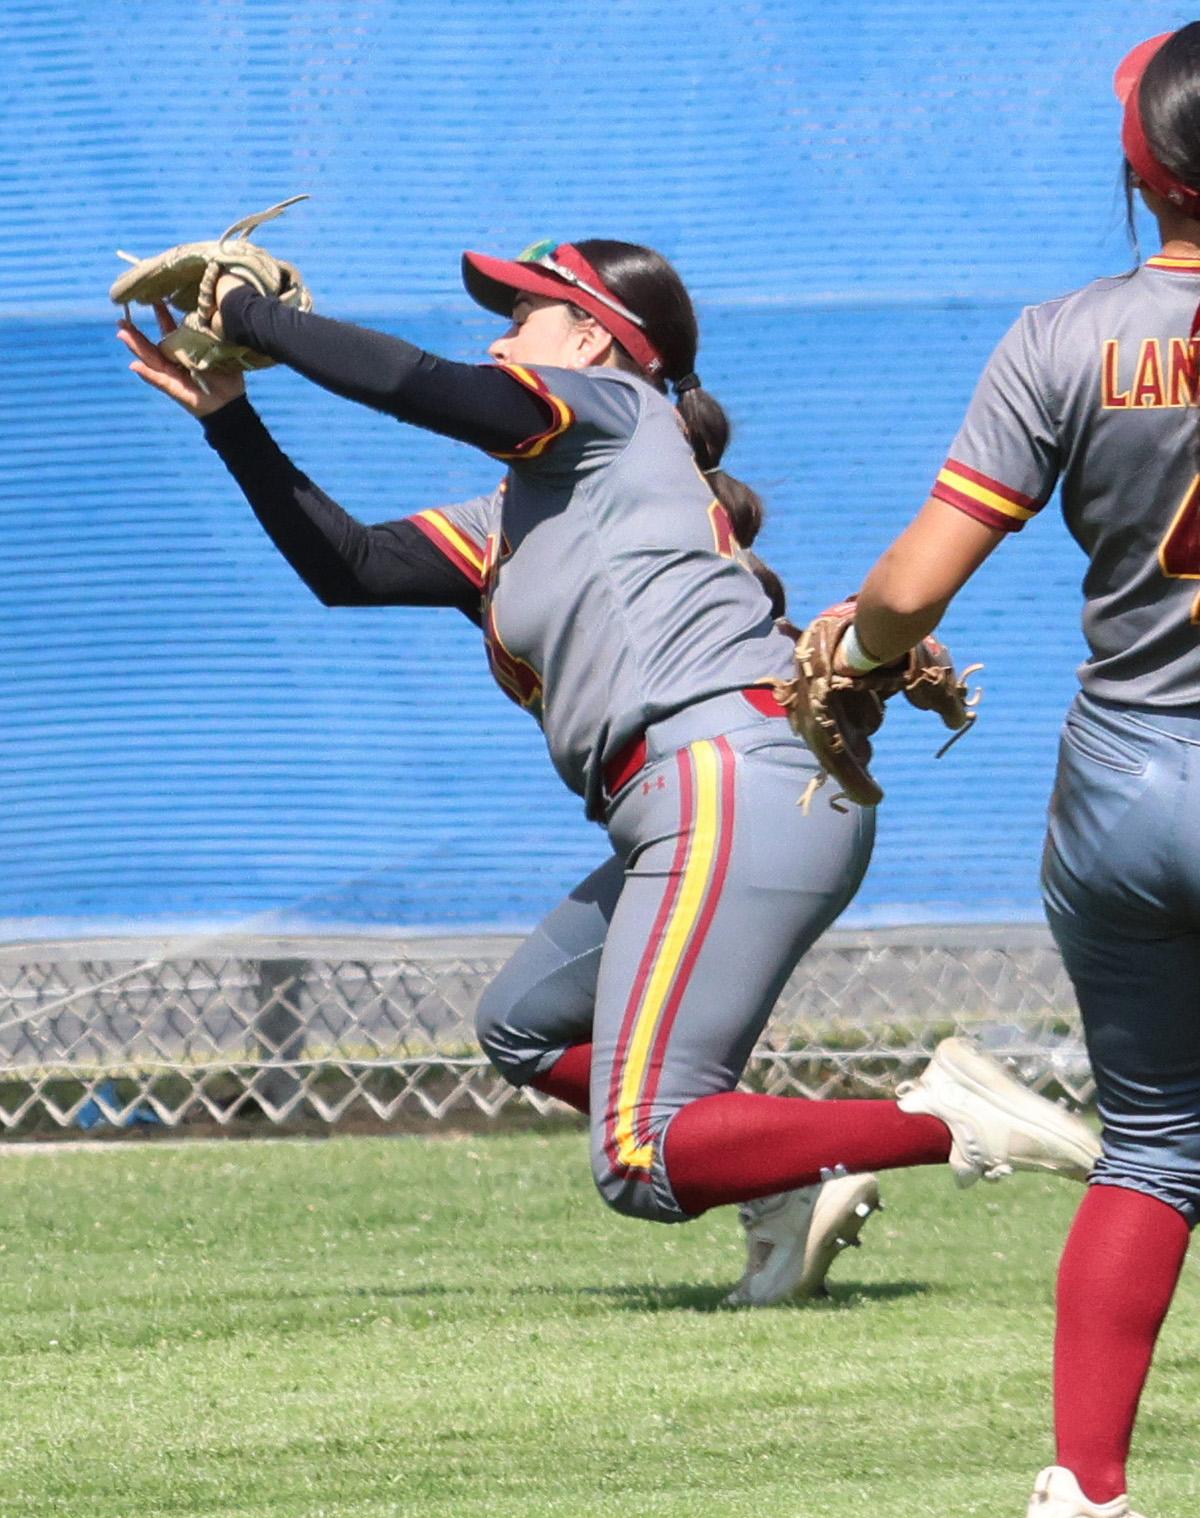 Olivia Nanez makes a great diving catch on this ball in game 1 of the Lancers regional playof series at Cypress College on Friday (photo by Richard Quinton).